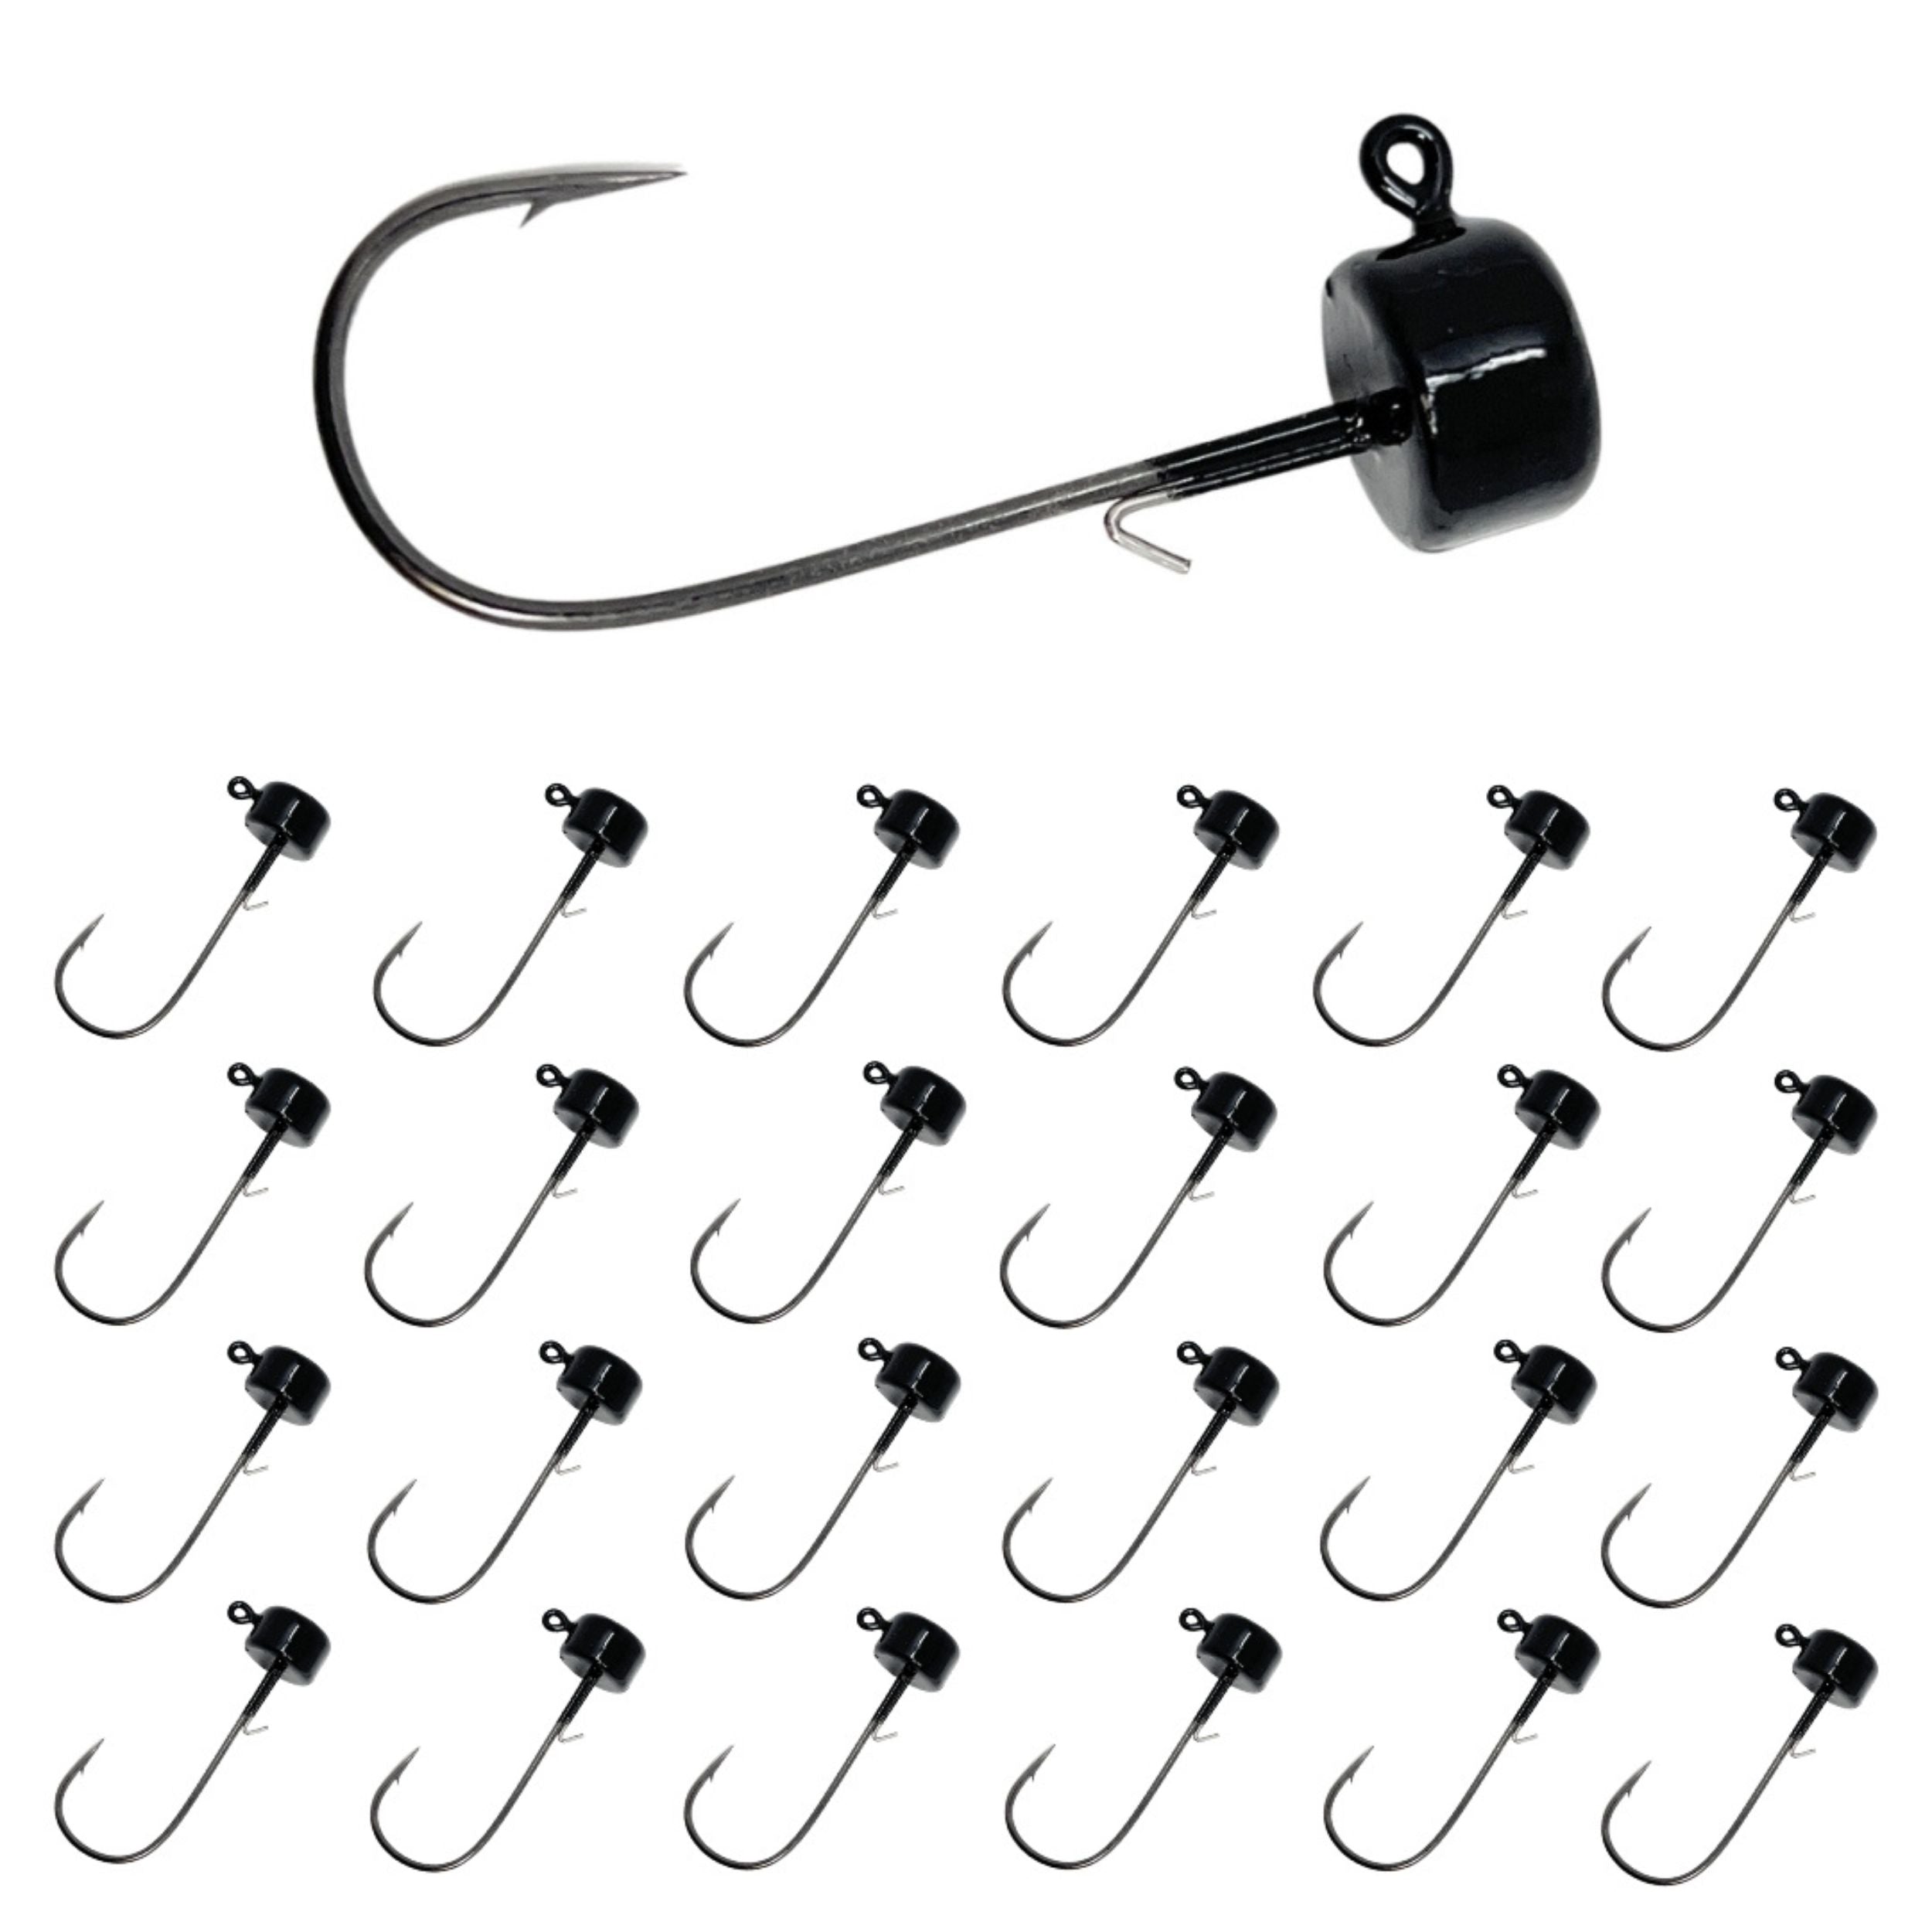 Reaction Tackle Tungsten Mushroom Head Ned Rig Shroom Jig Heads for Finesse  Fishing, Weedless Jig Head for Bass Fishing with Soft Lures (5-Pack) 1/8oz